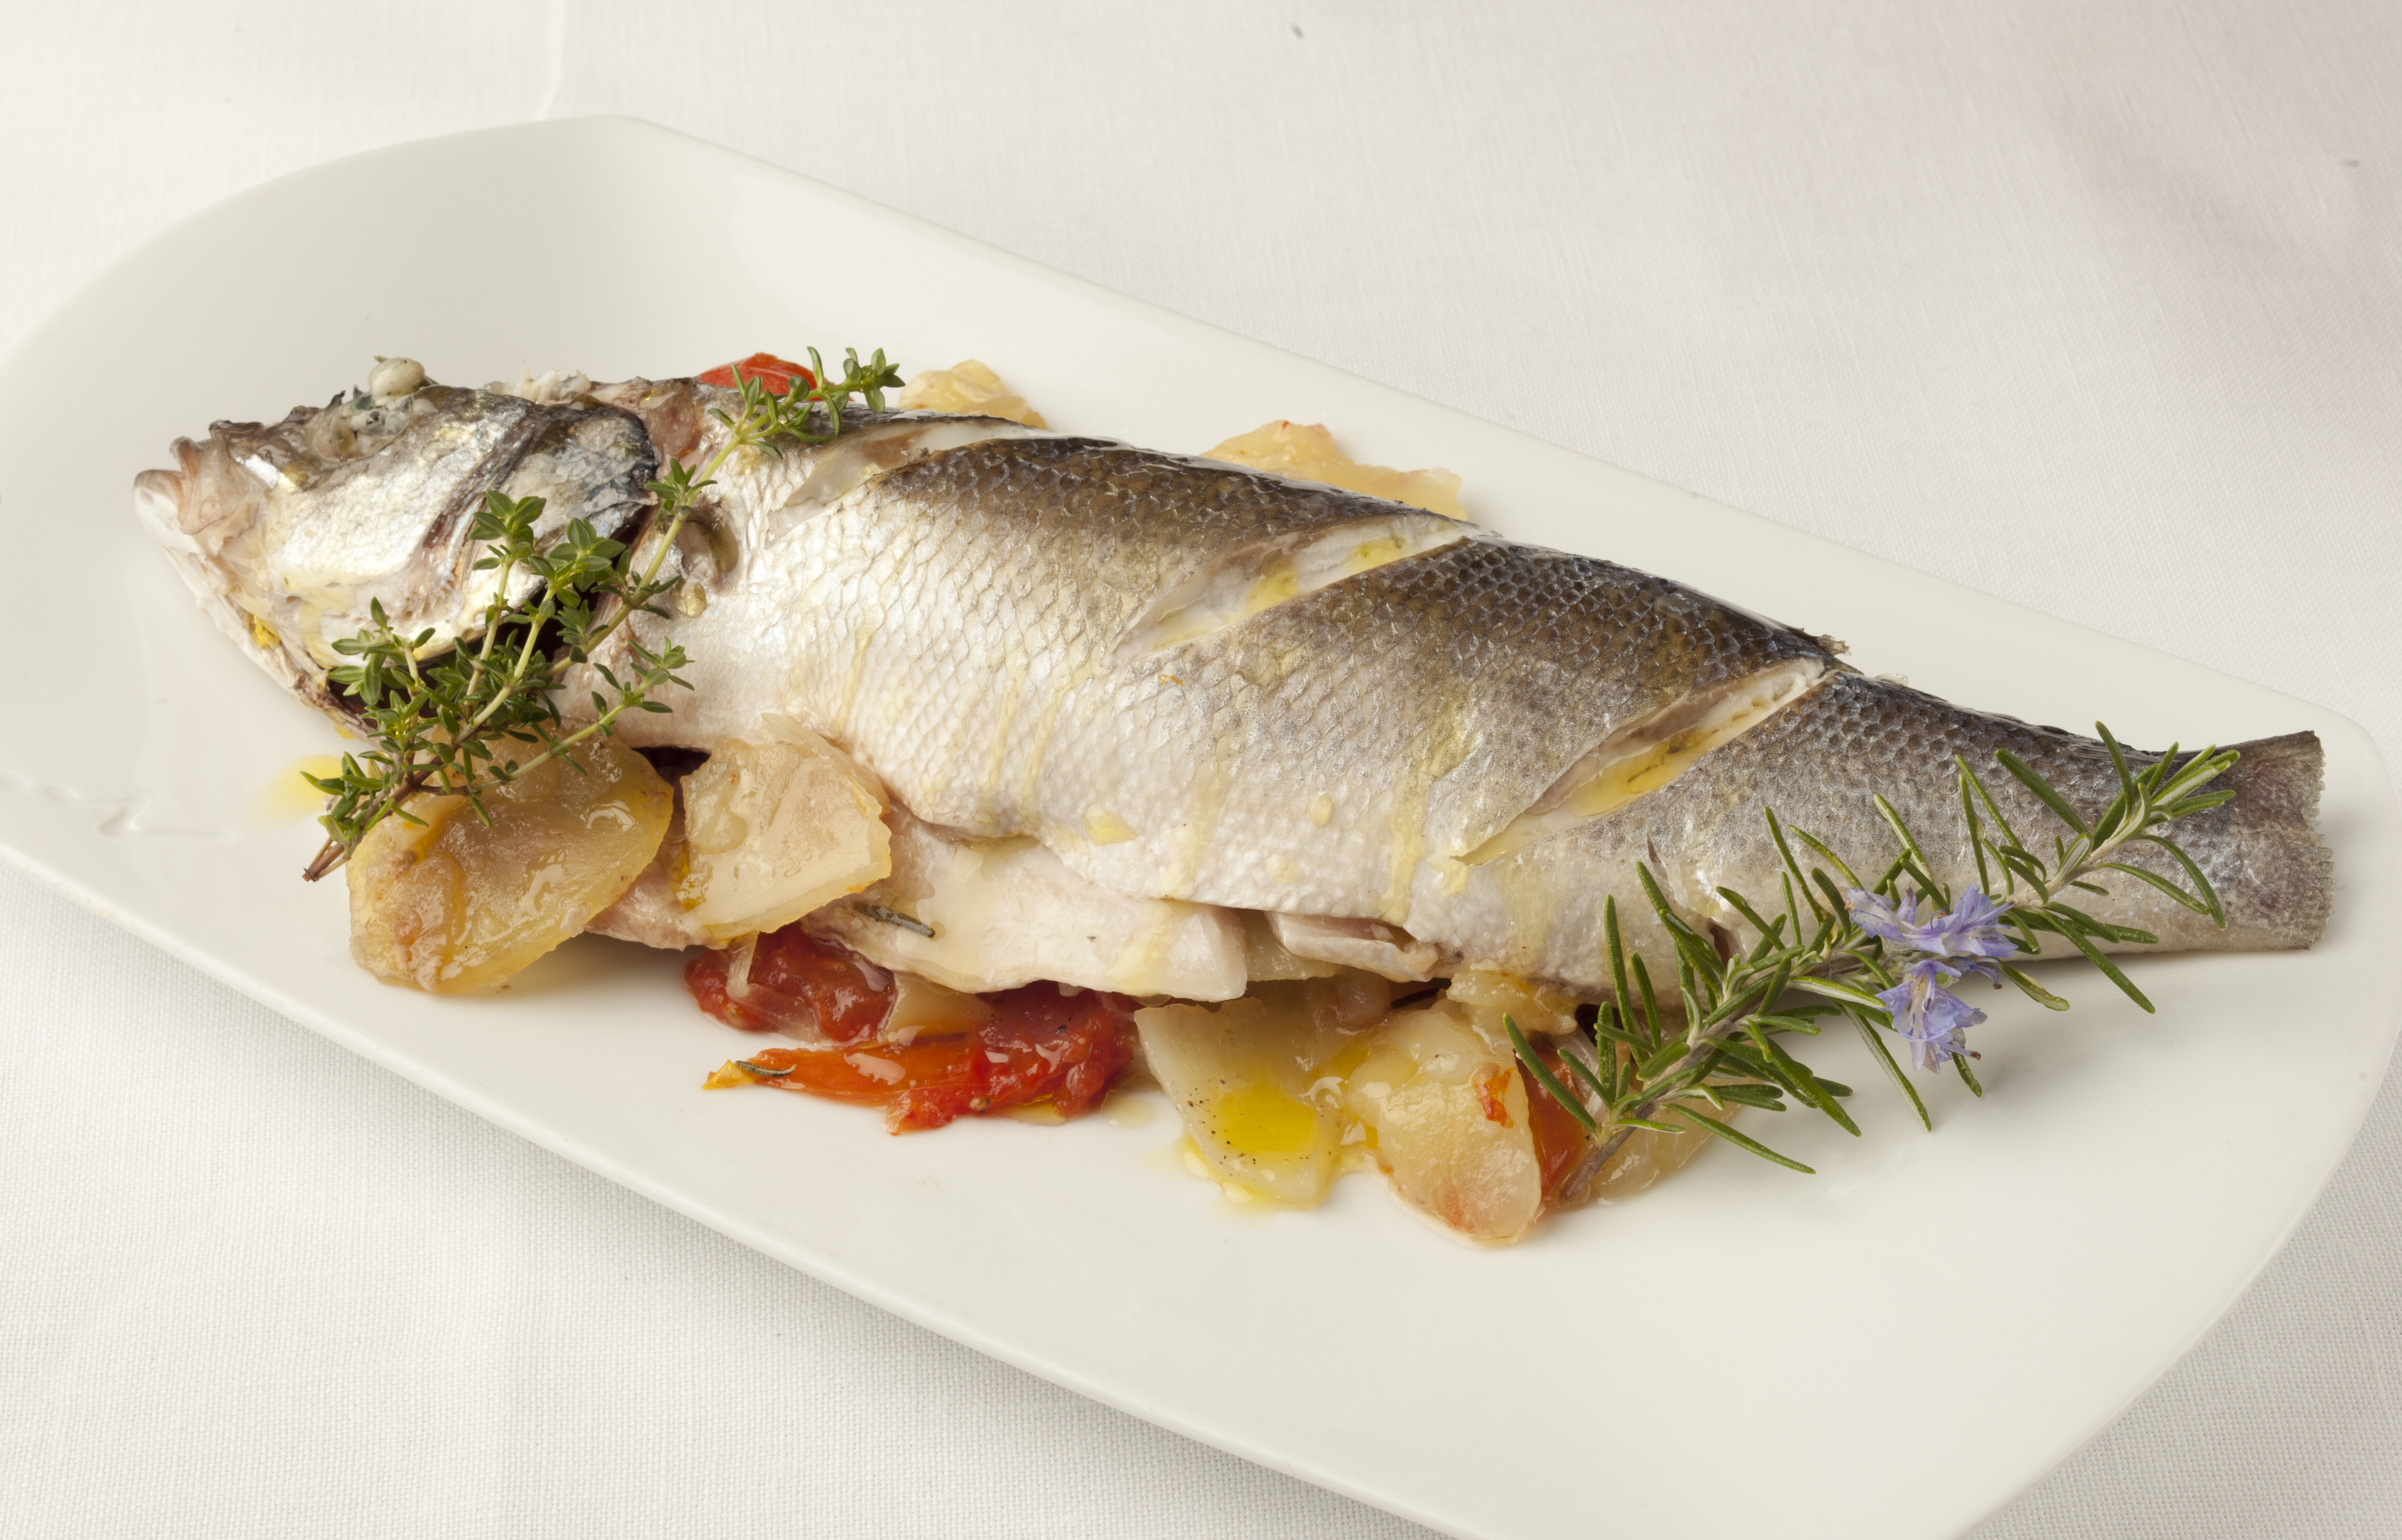 Baked sea bass, from The Family Meal, 10th Anniversary Edition